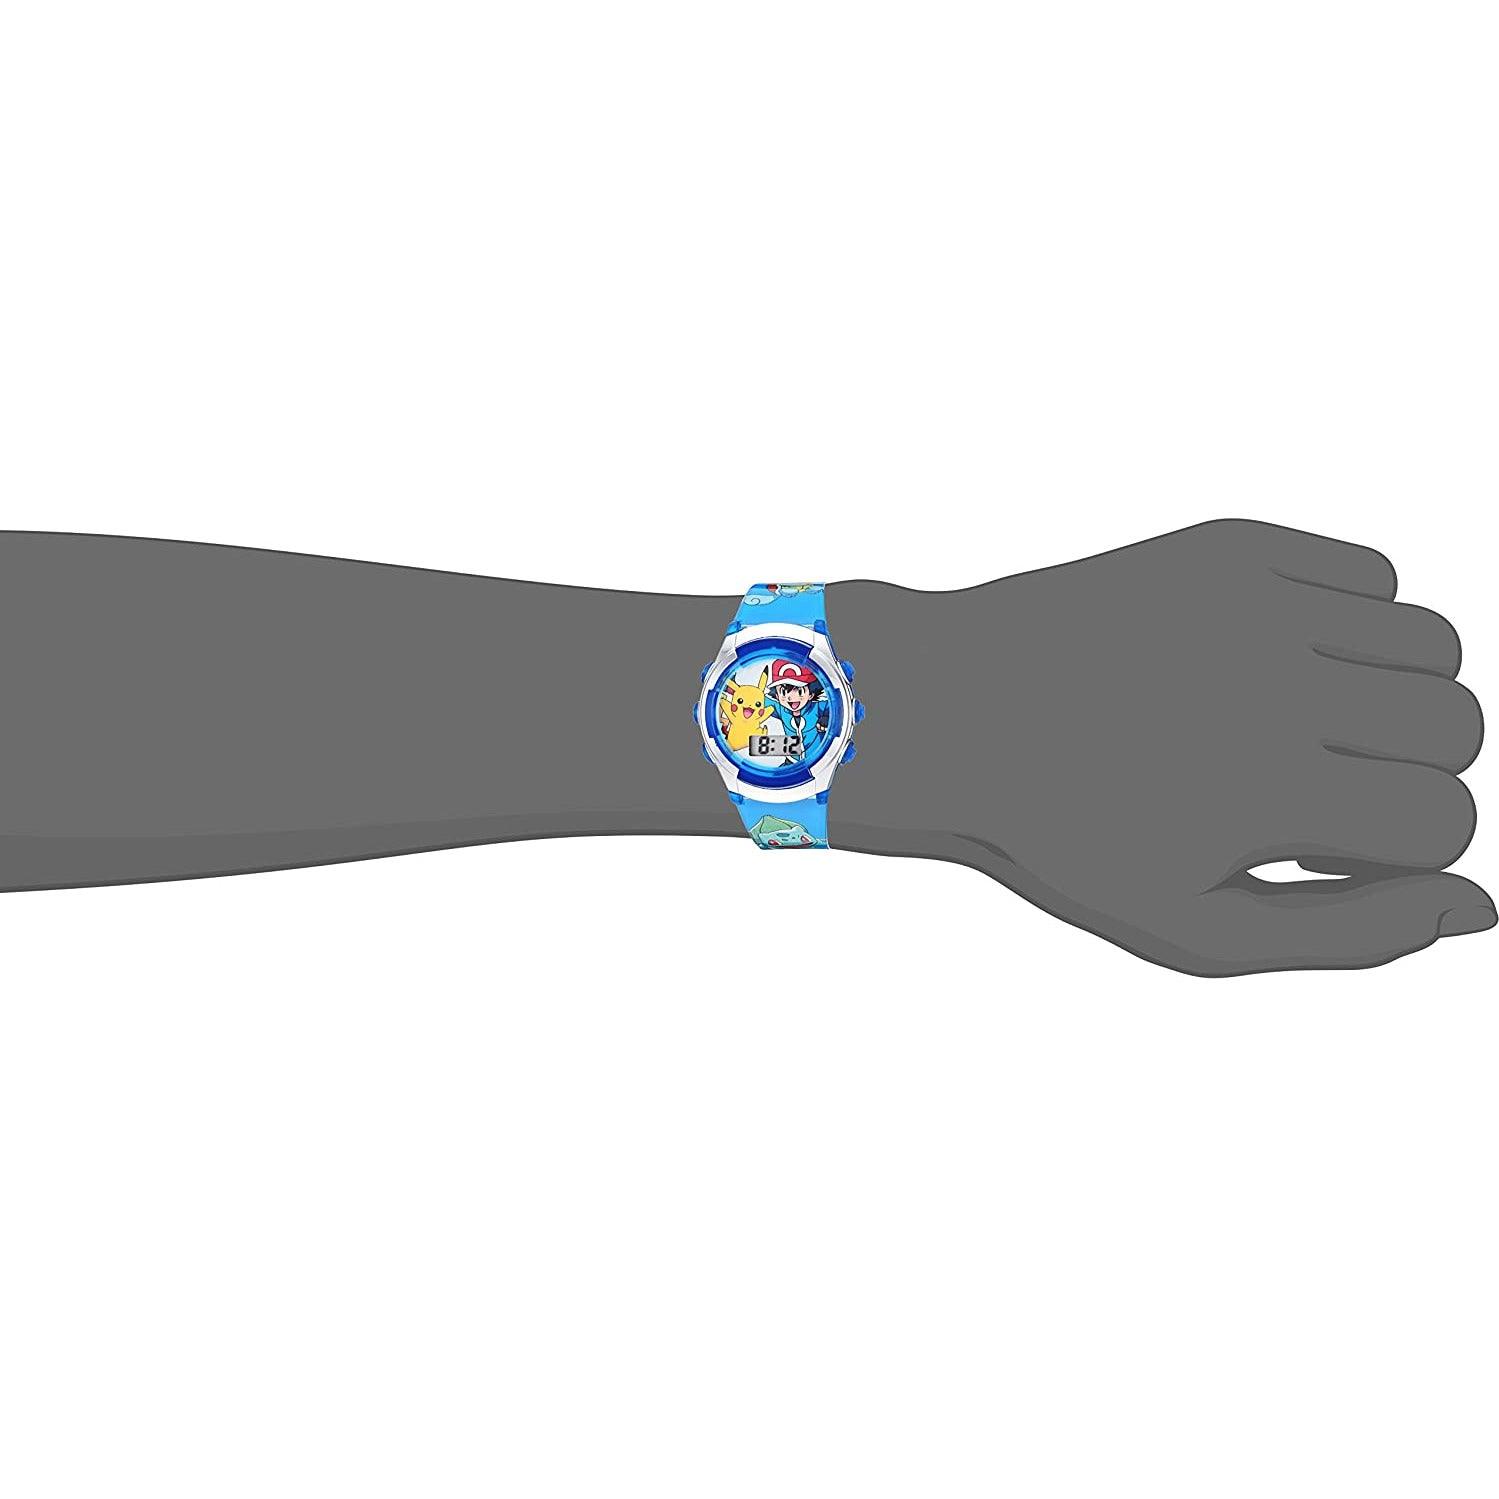 Accutime Kids Pokemon Pikachu & Ash Digital LCD Quartz Blue Wrist Watch with Blue Strap, Cool Inexpensive Gift & Party Favor for Toddlers, Boys, Girls, Adults All Ages (Model: POK3017) - BumbleToys - 5-7 Years, Boys, Girls, OXE, POKEMON, Pre-Order, Wrist Watches